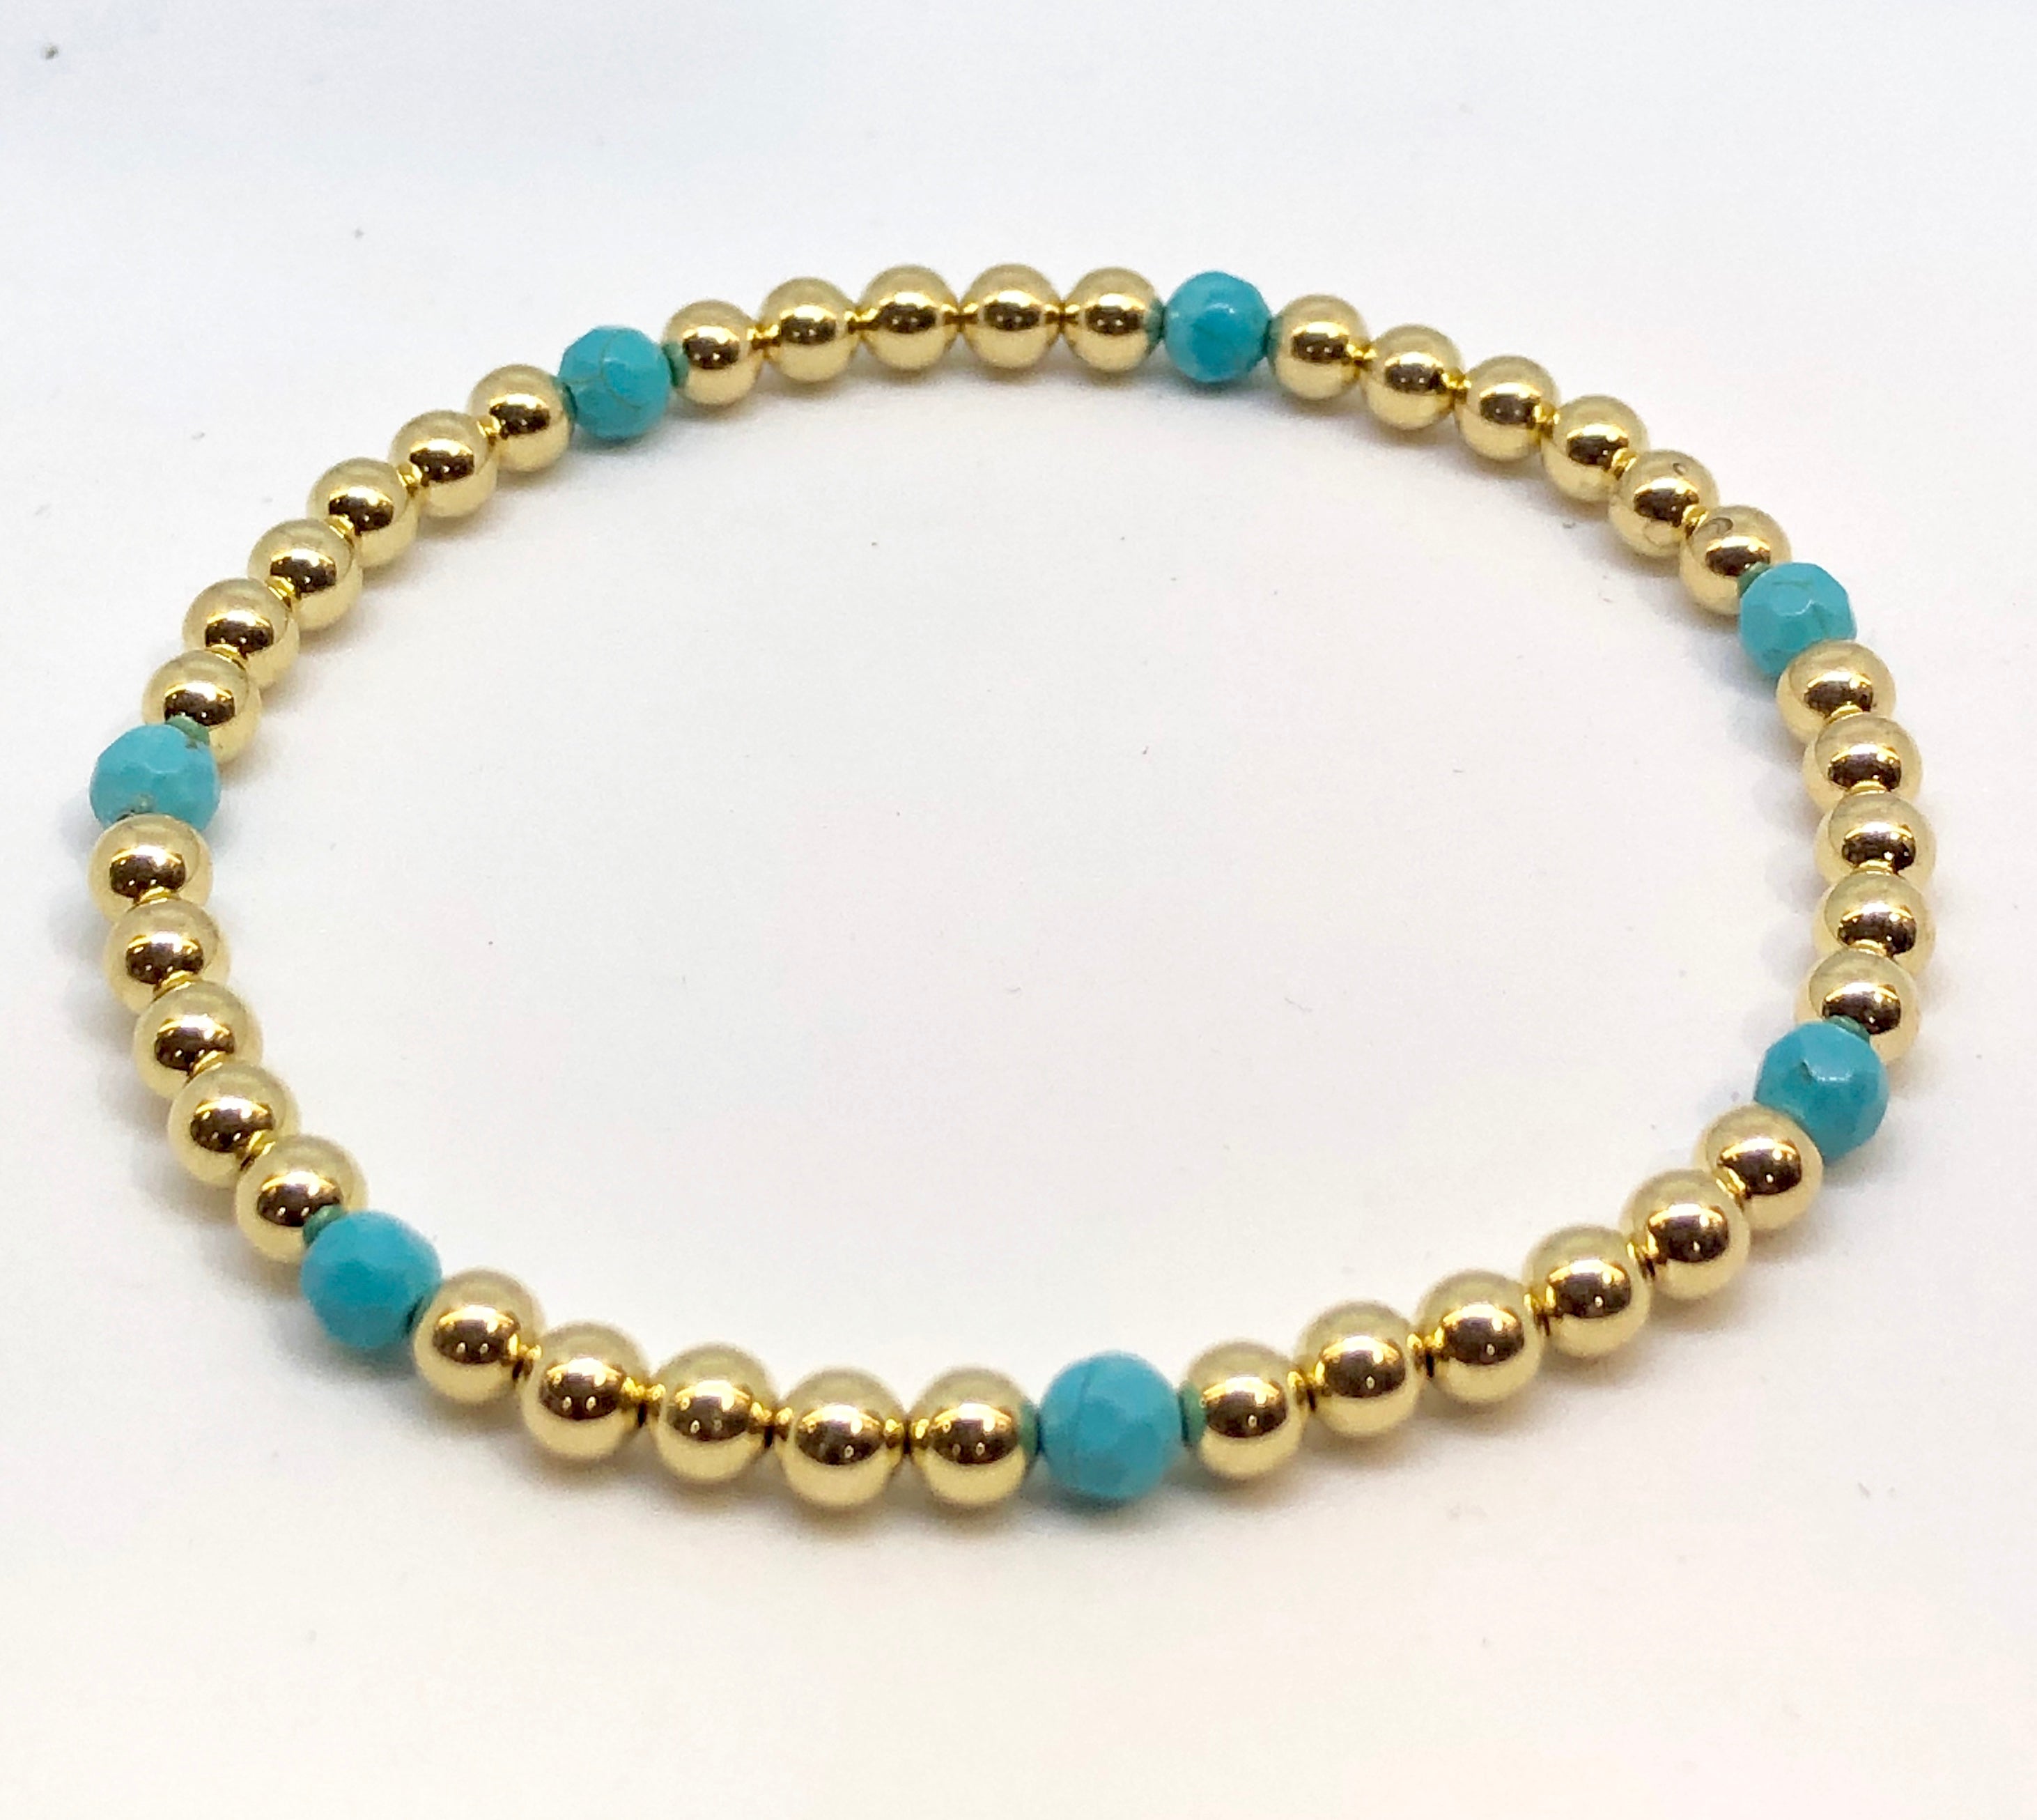 4mm 14kt Gold Filled Bead Bracelet with 7 4mm Turquoise Beads